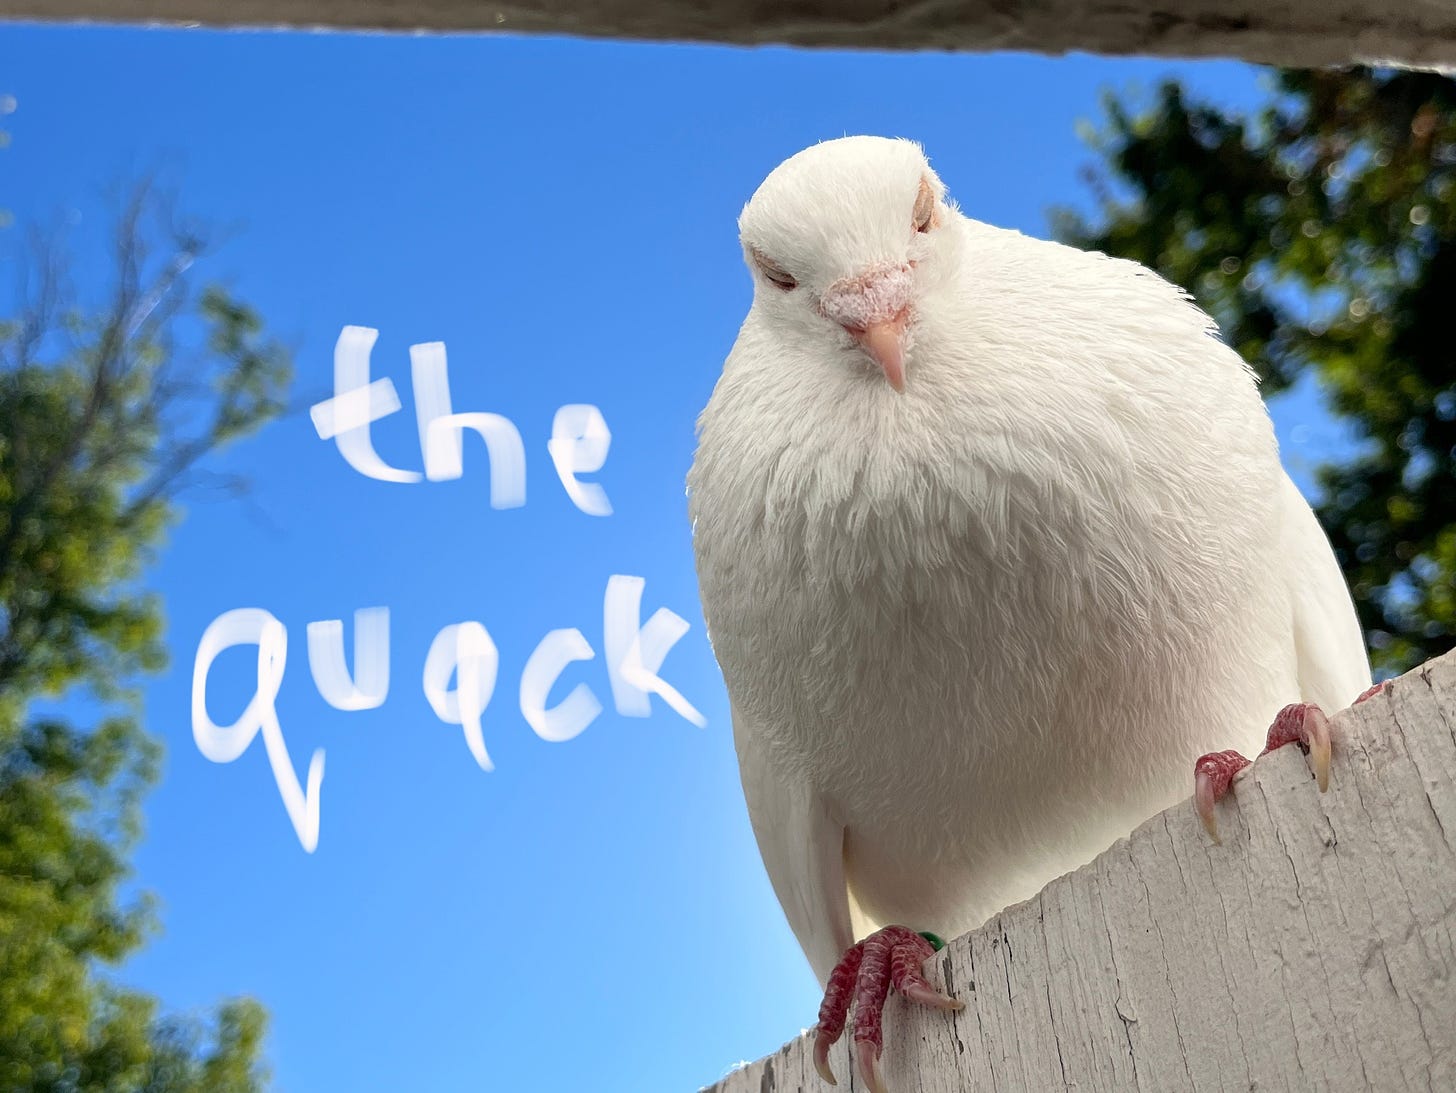 A white pigeon glares down from the top of a door. A blue sky is behind it. The words "the quack" are on the sky in whispy white letters.